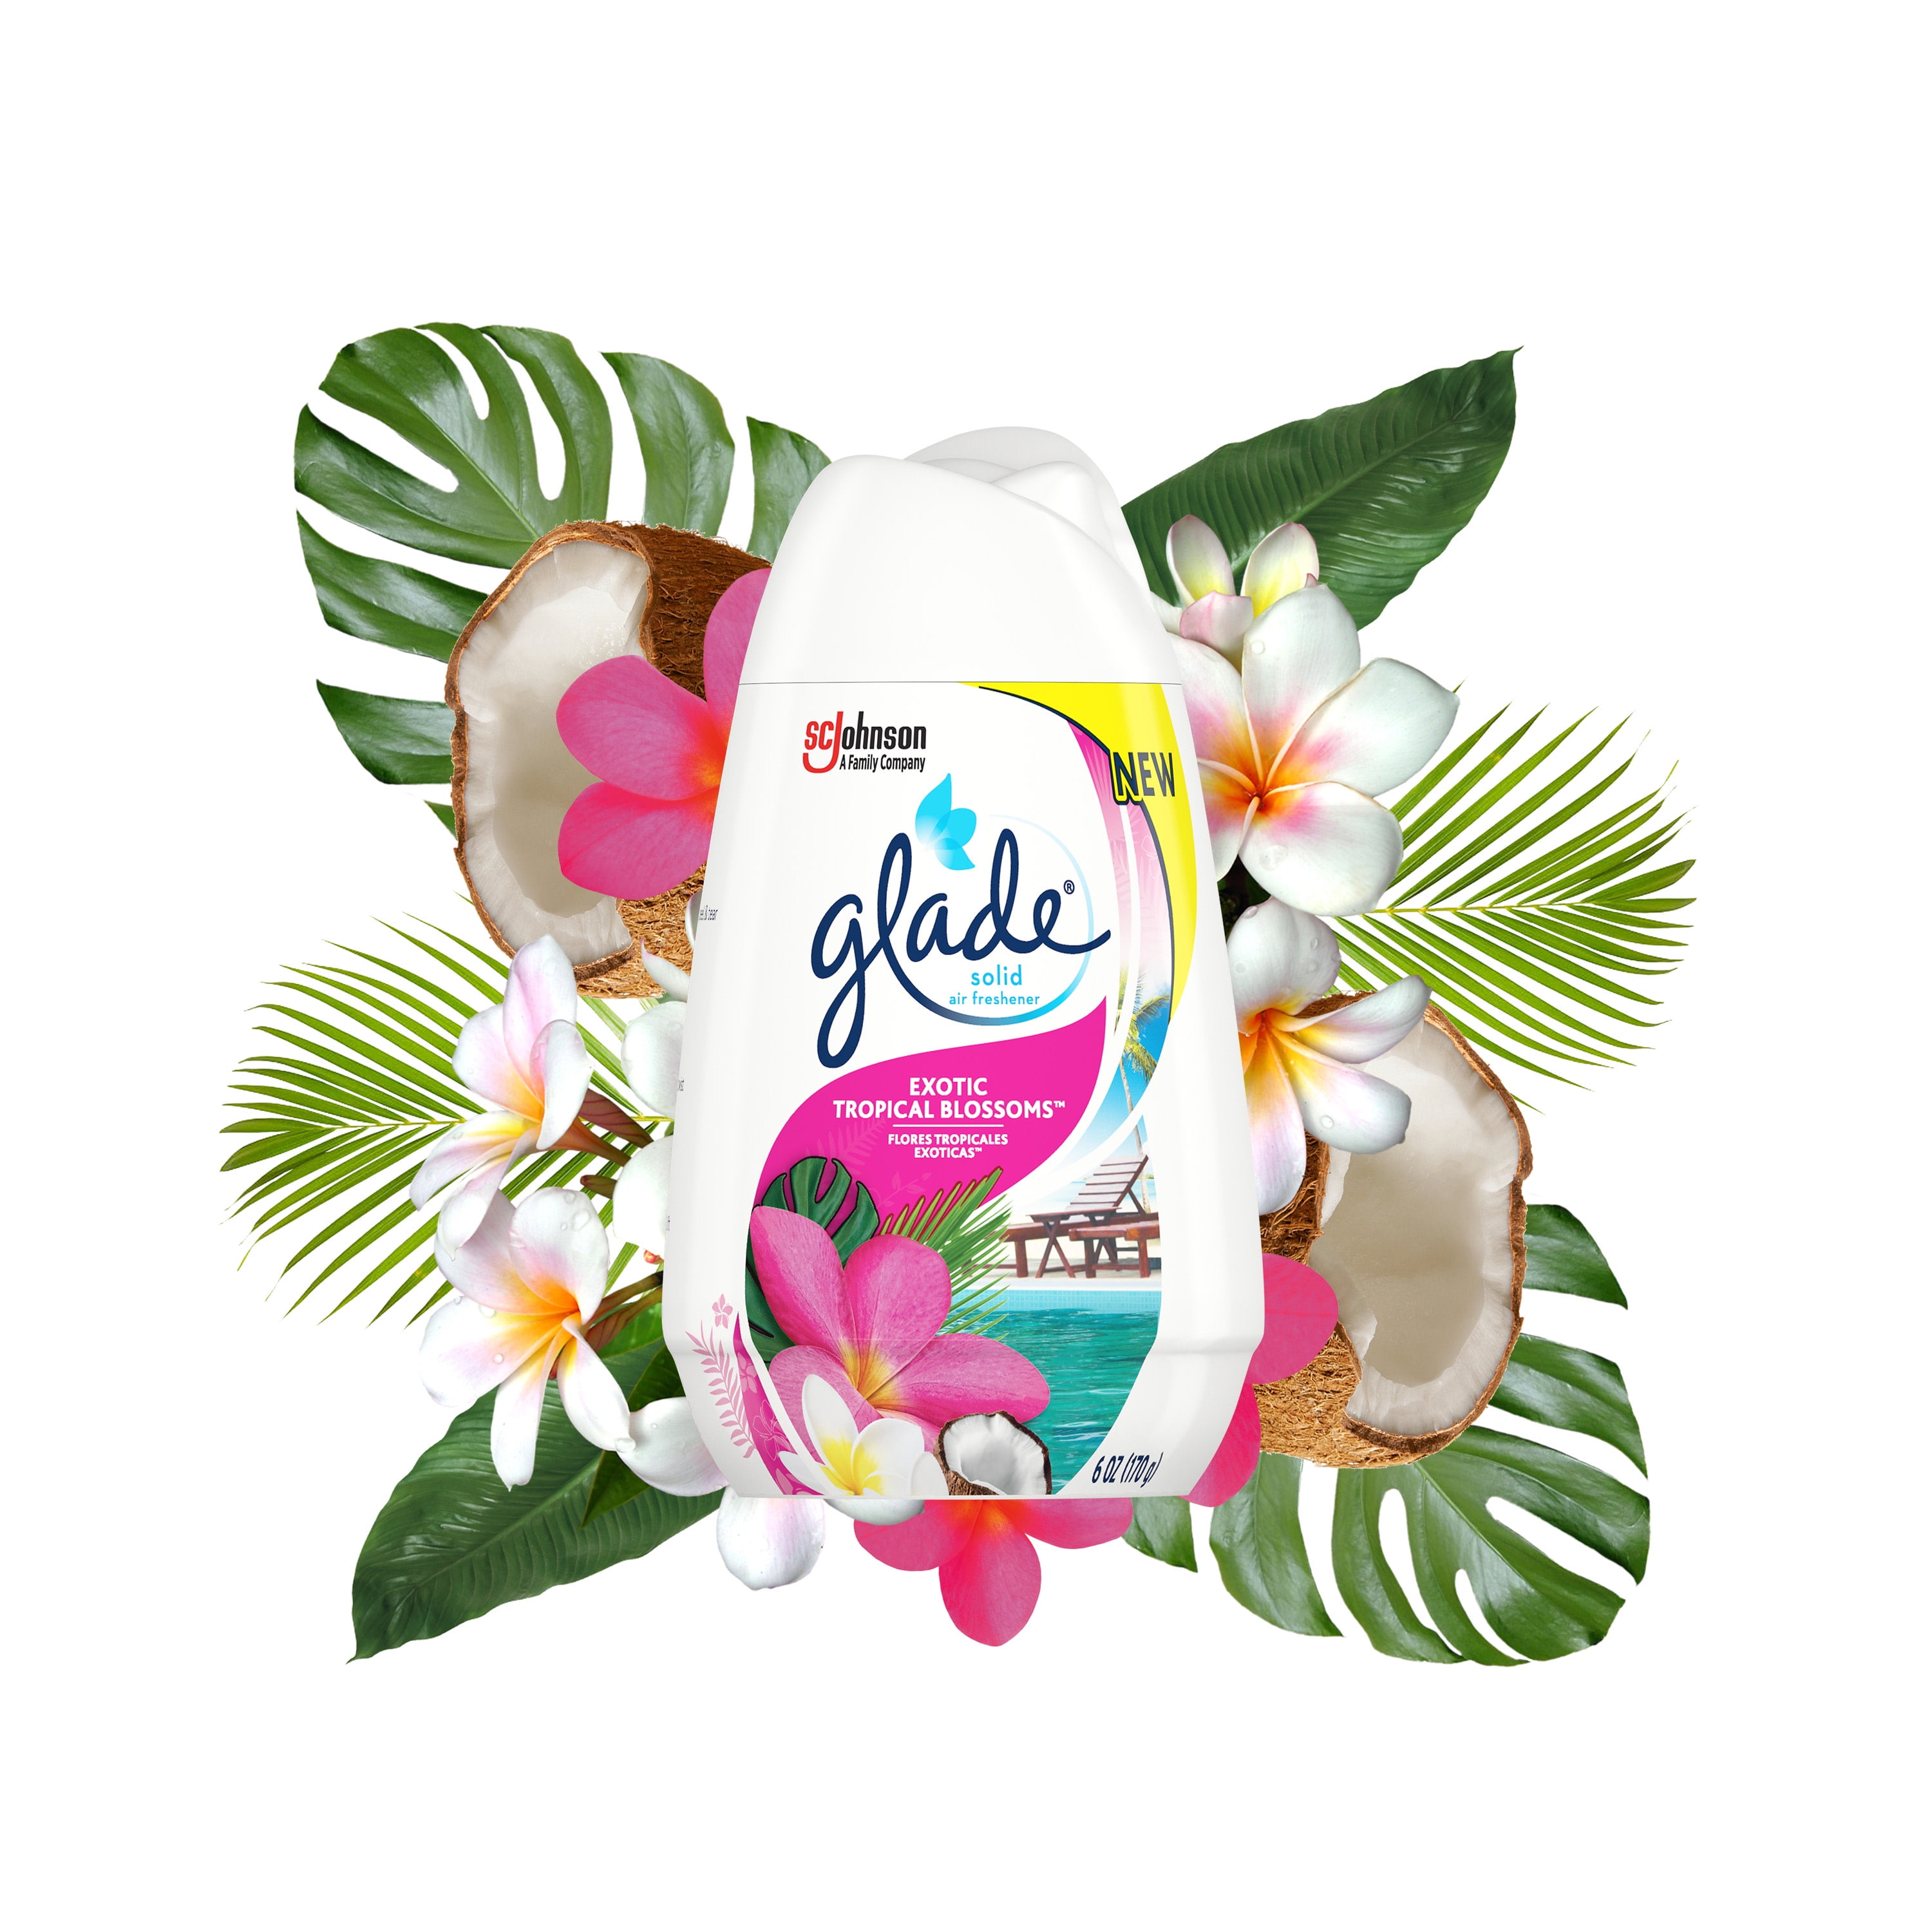 Glade Solid Gel Cone, Exotic Tropical Blossoms, Solid Gel Air Freshener, 6 Oz